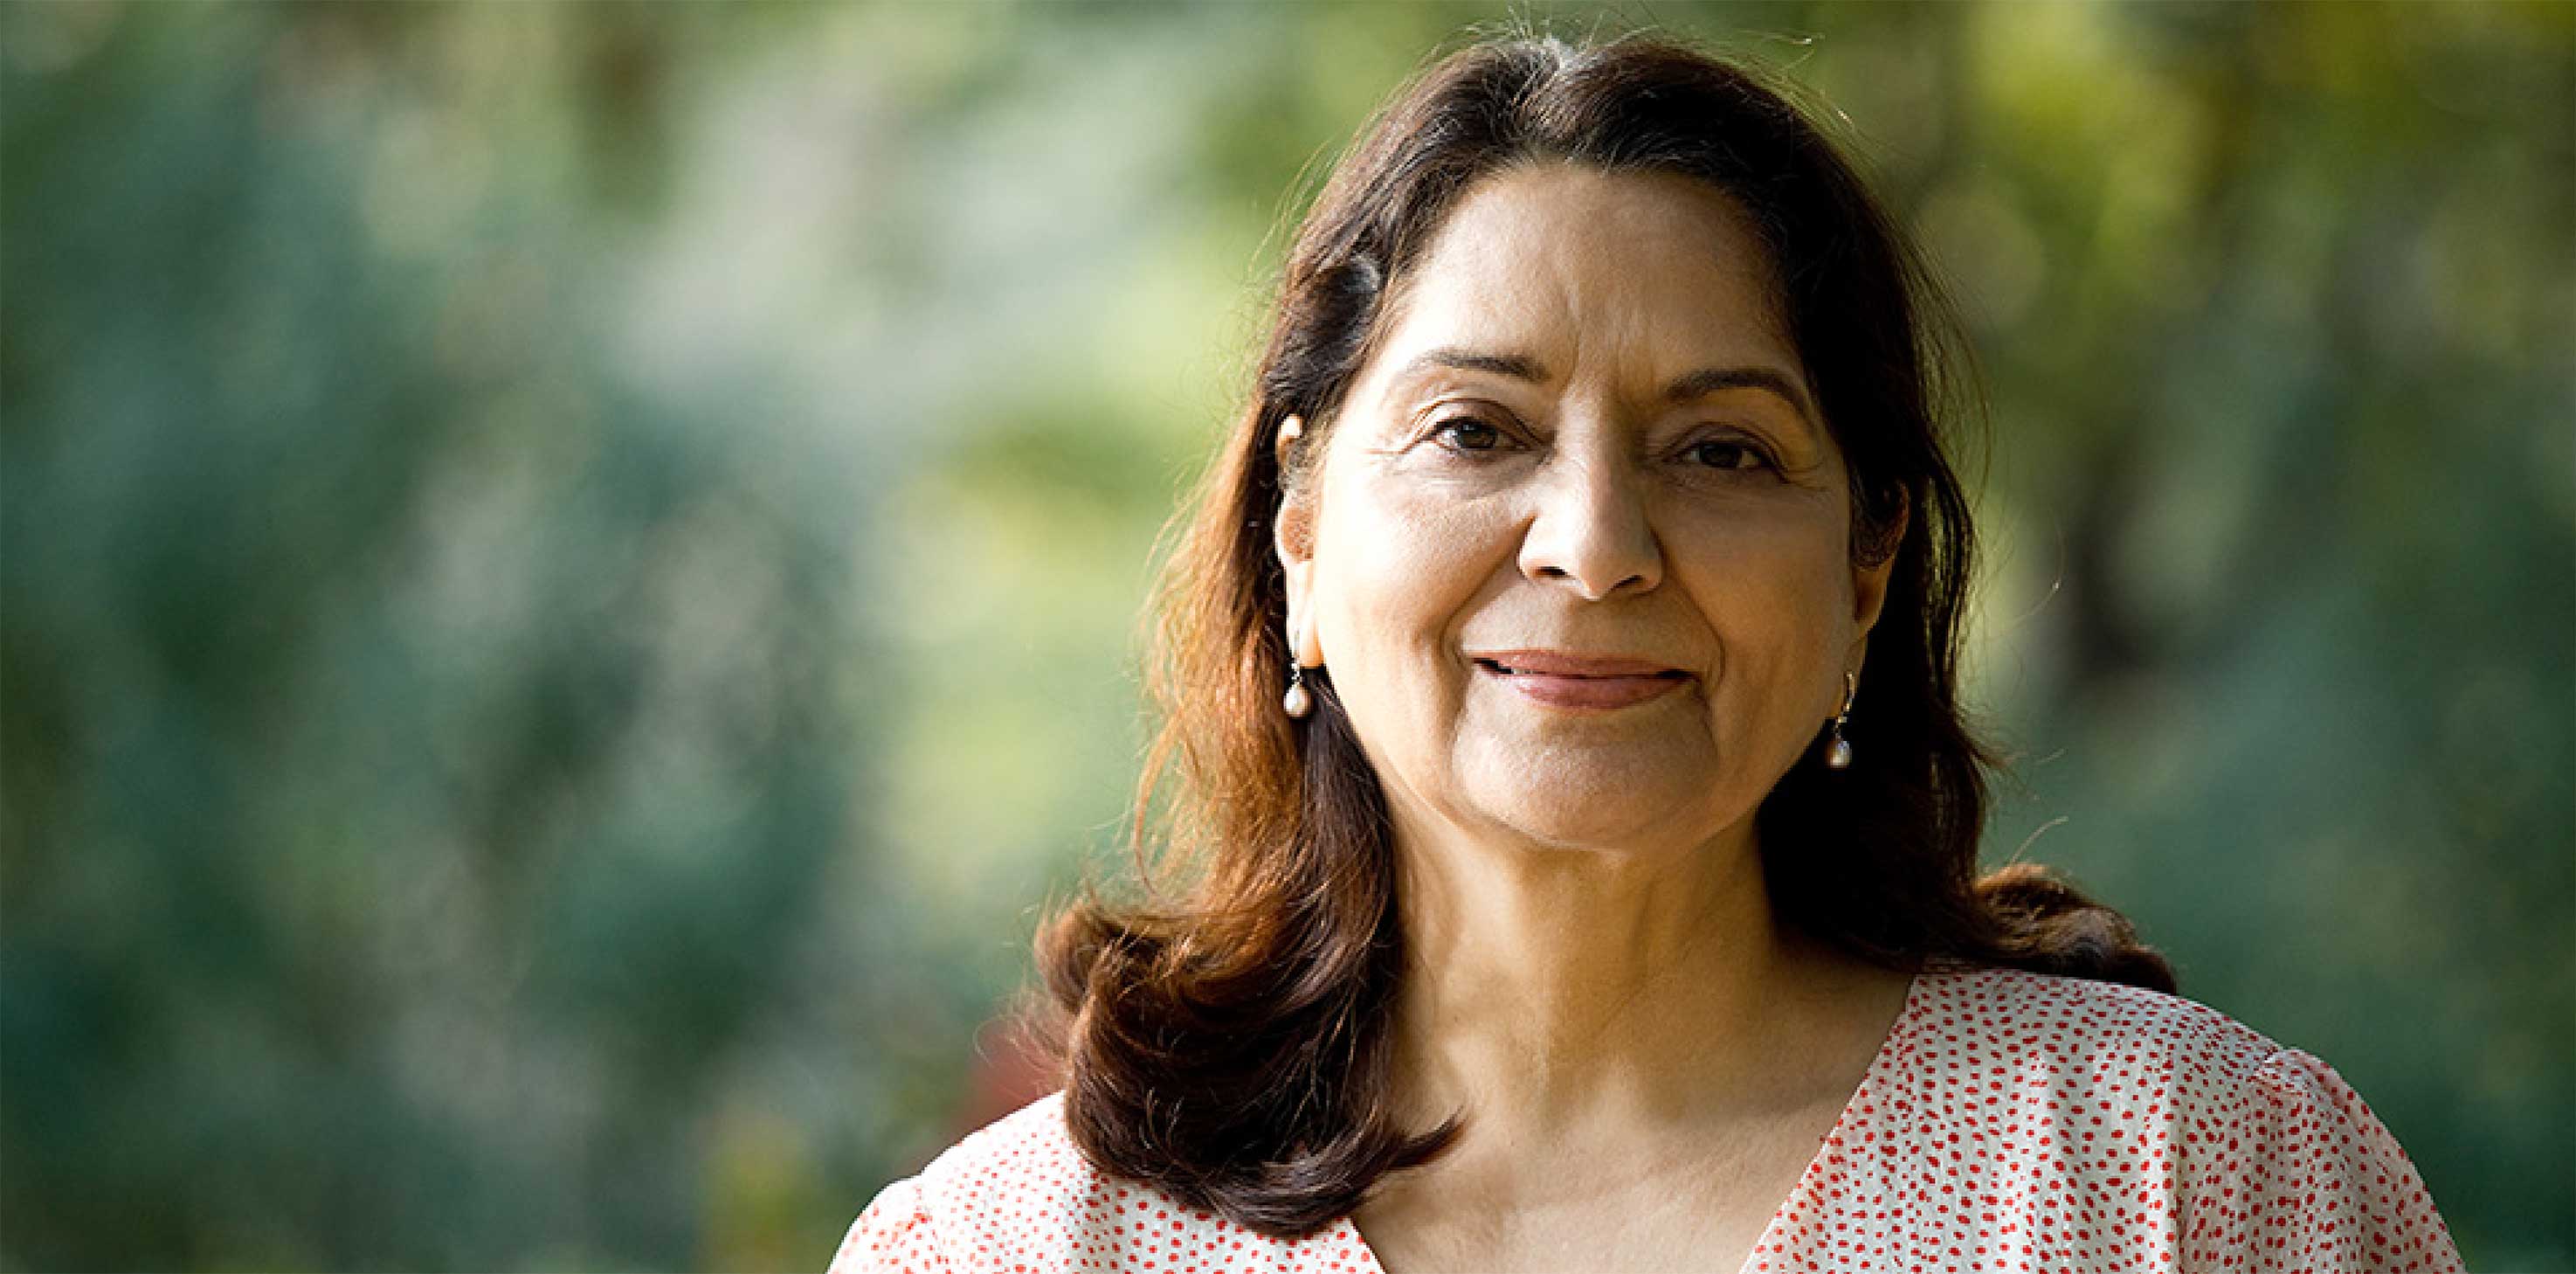 A headshot of a middle-aged woman of South Asian descent, smiling softly at the camera.